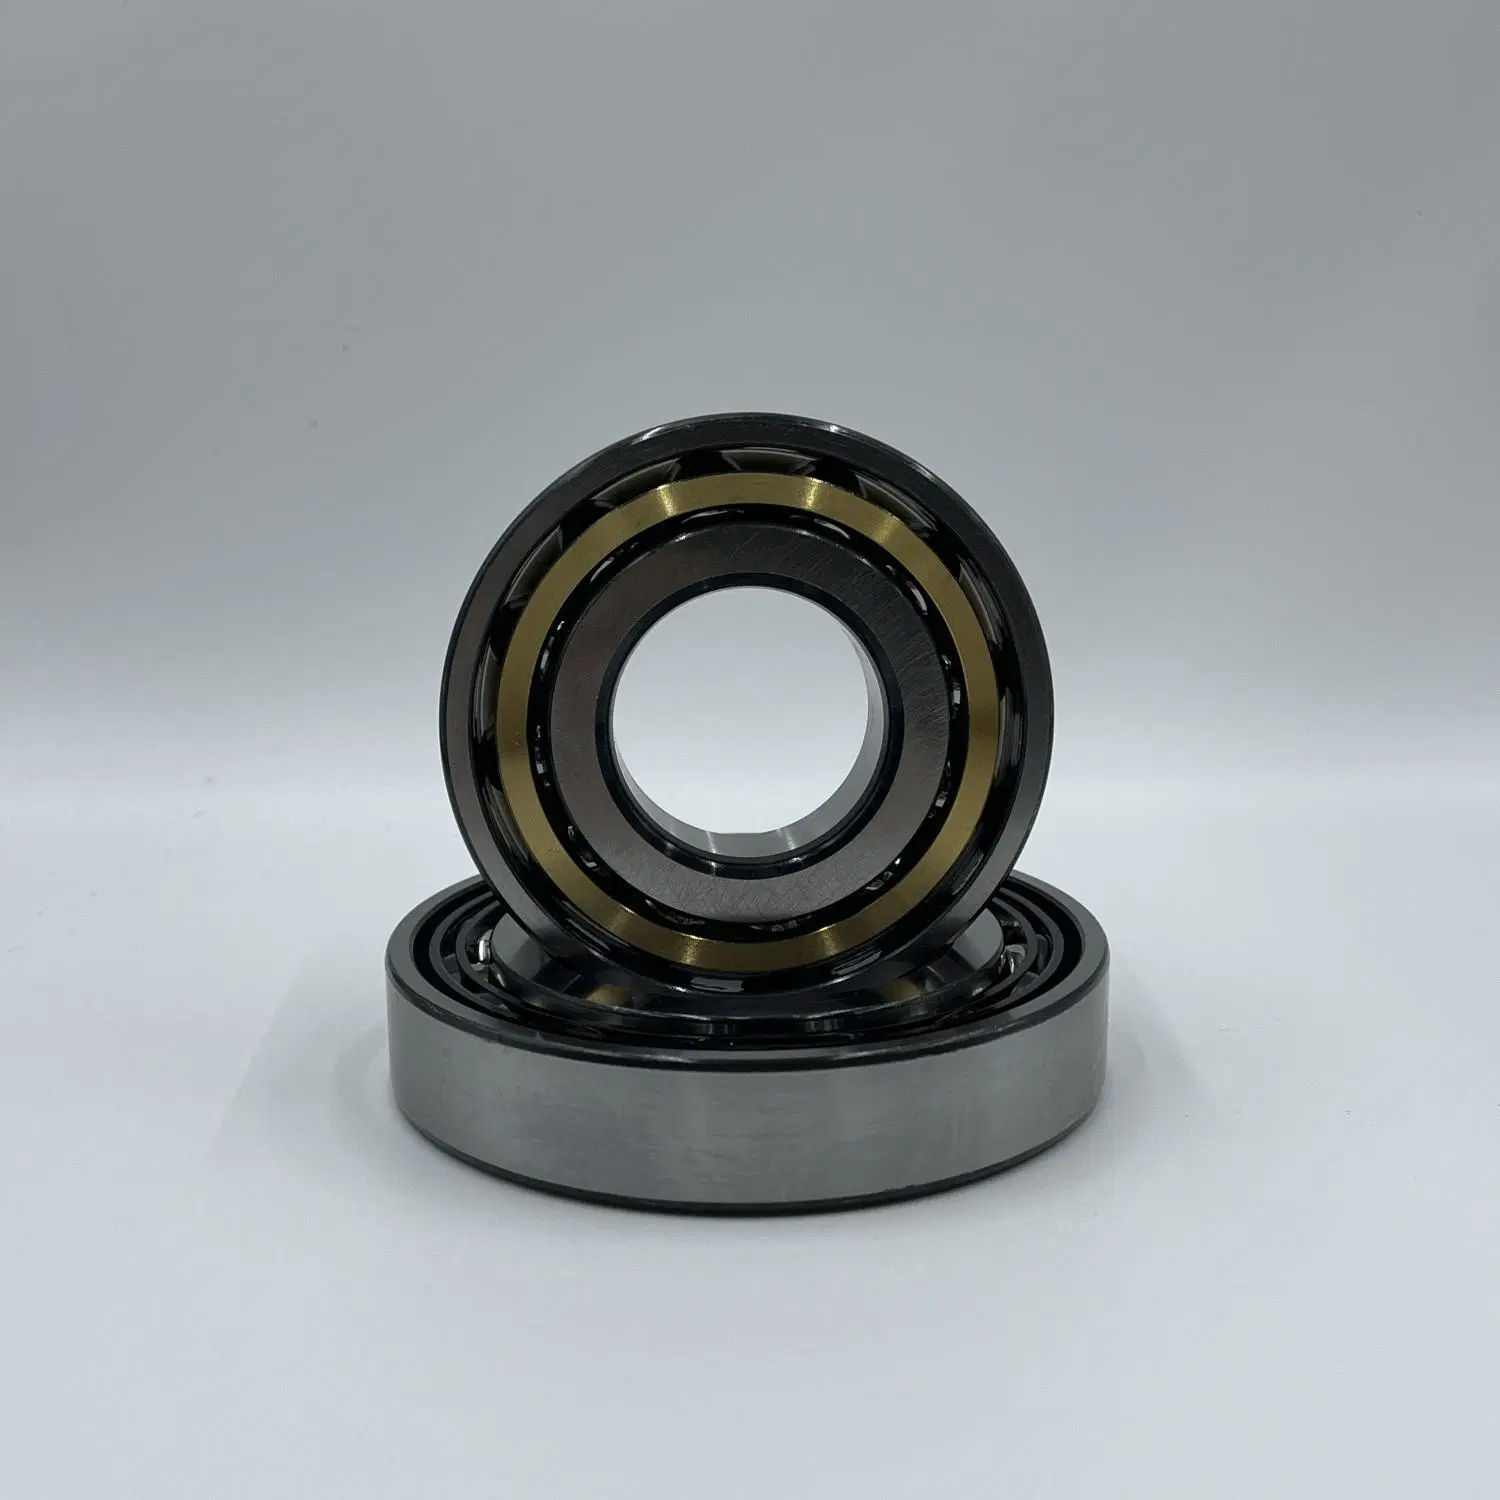 7310 Double Rows Augular-Contact Ball Bearing for Welding Machines